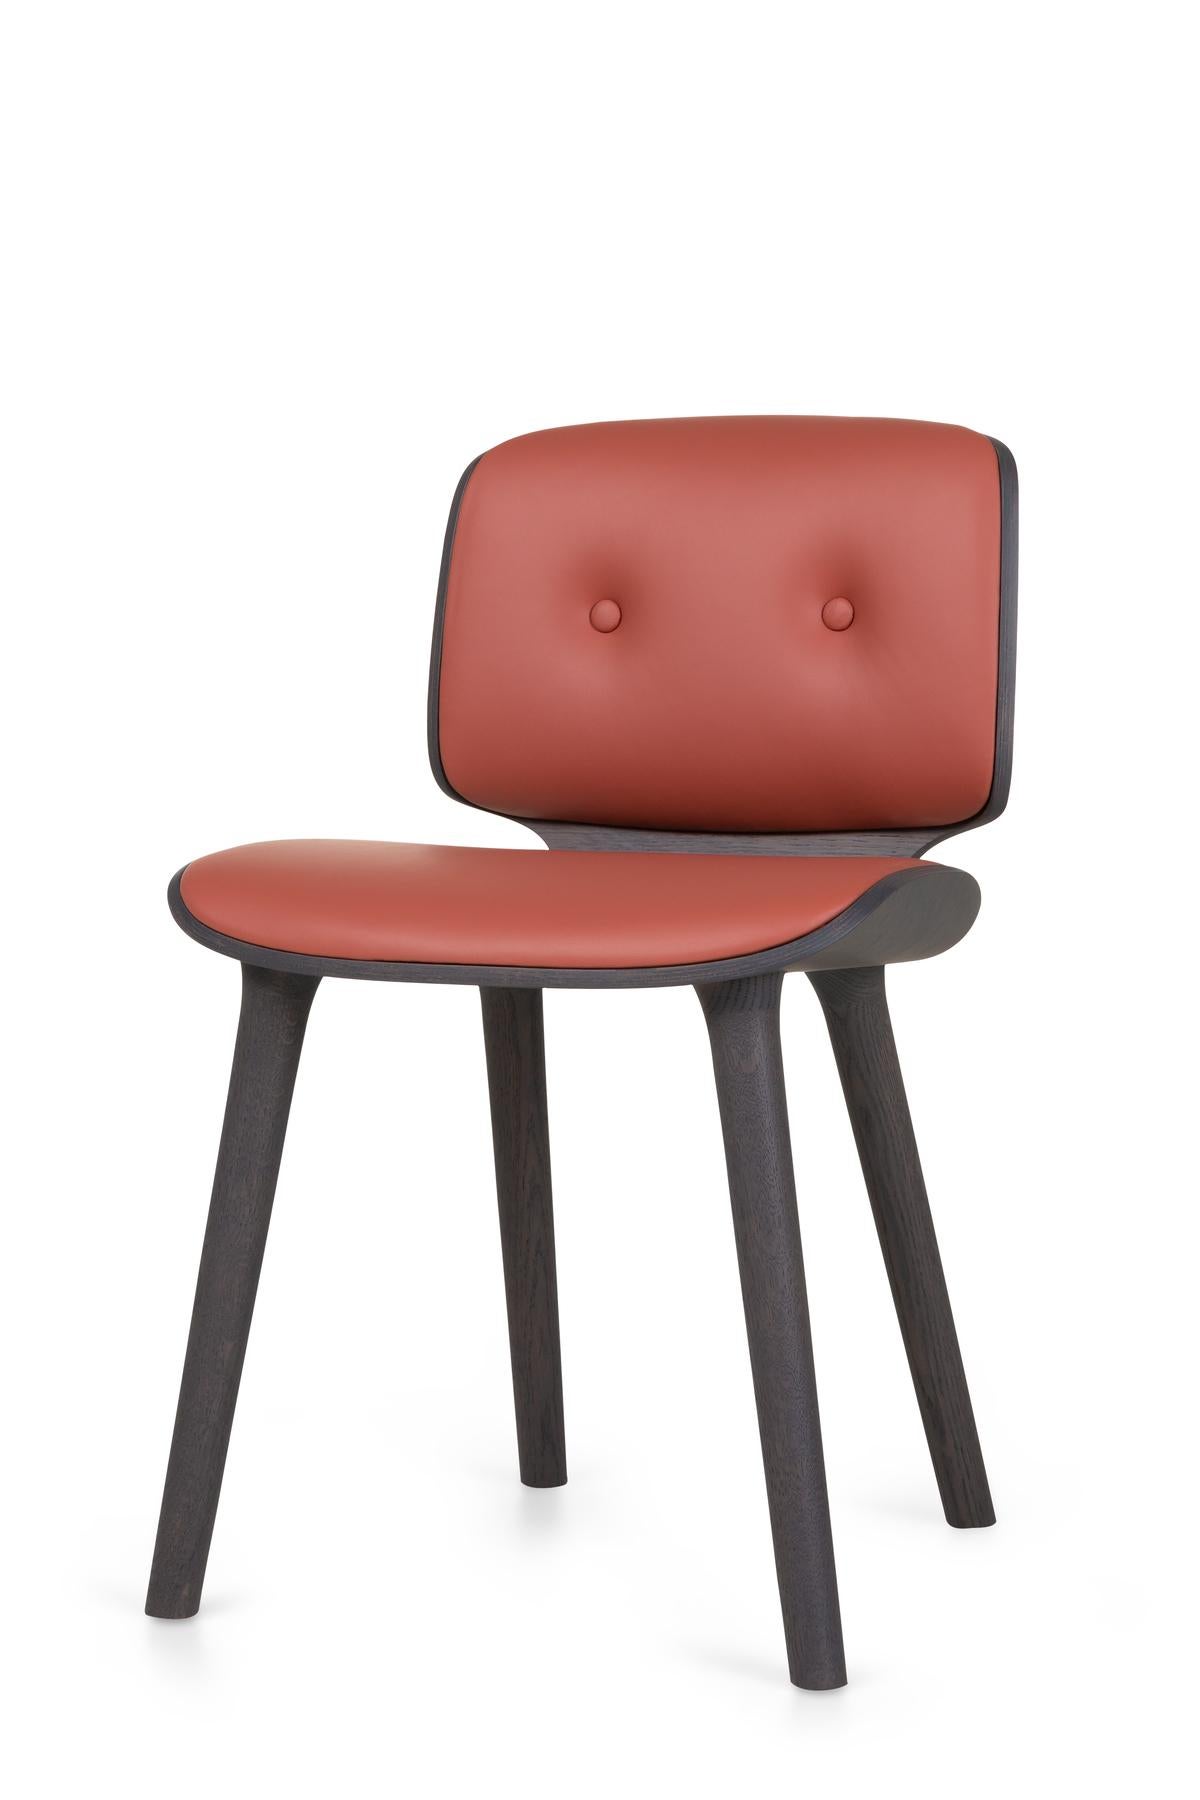 Dutch Moooi Nut Dining Chair in Grey Stained Oak & Spectrum Red Brown 30172 Upholstery For Sale